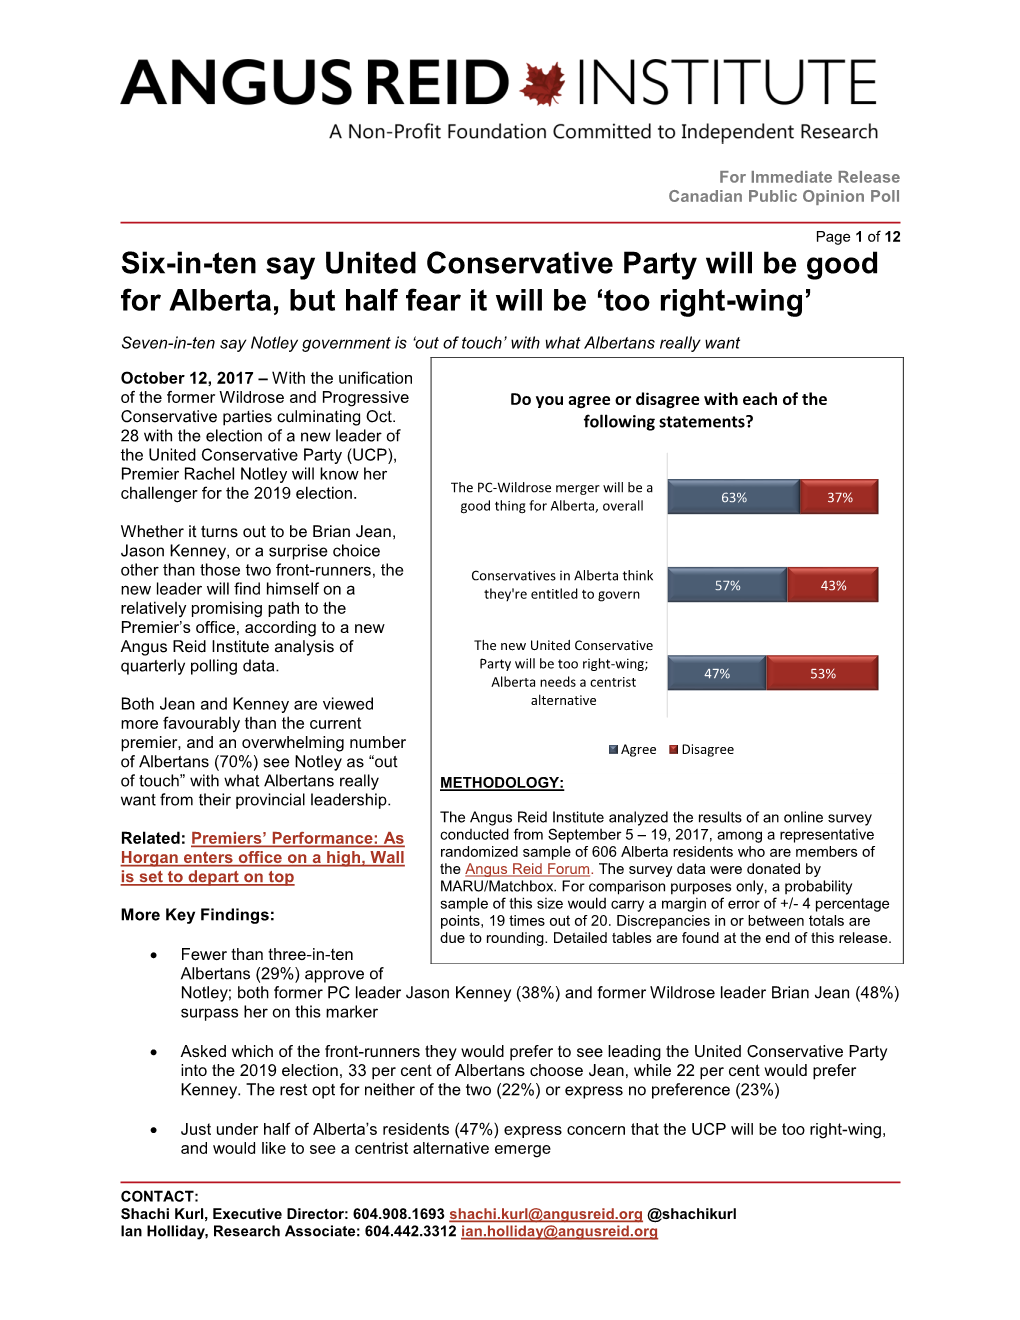 Six-In-Ten Say United Conservative Party Will Be Good for Alberta, but Half Fear It Will Be ‘Too Right-Wing’